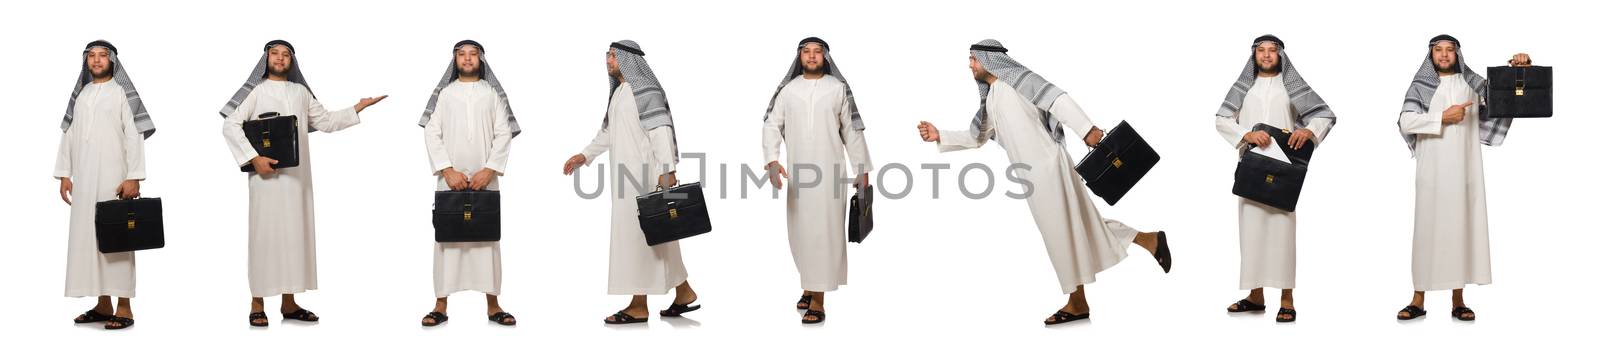 Concept with arab man isolated on white